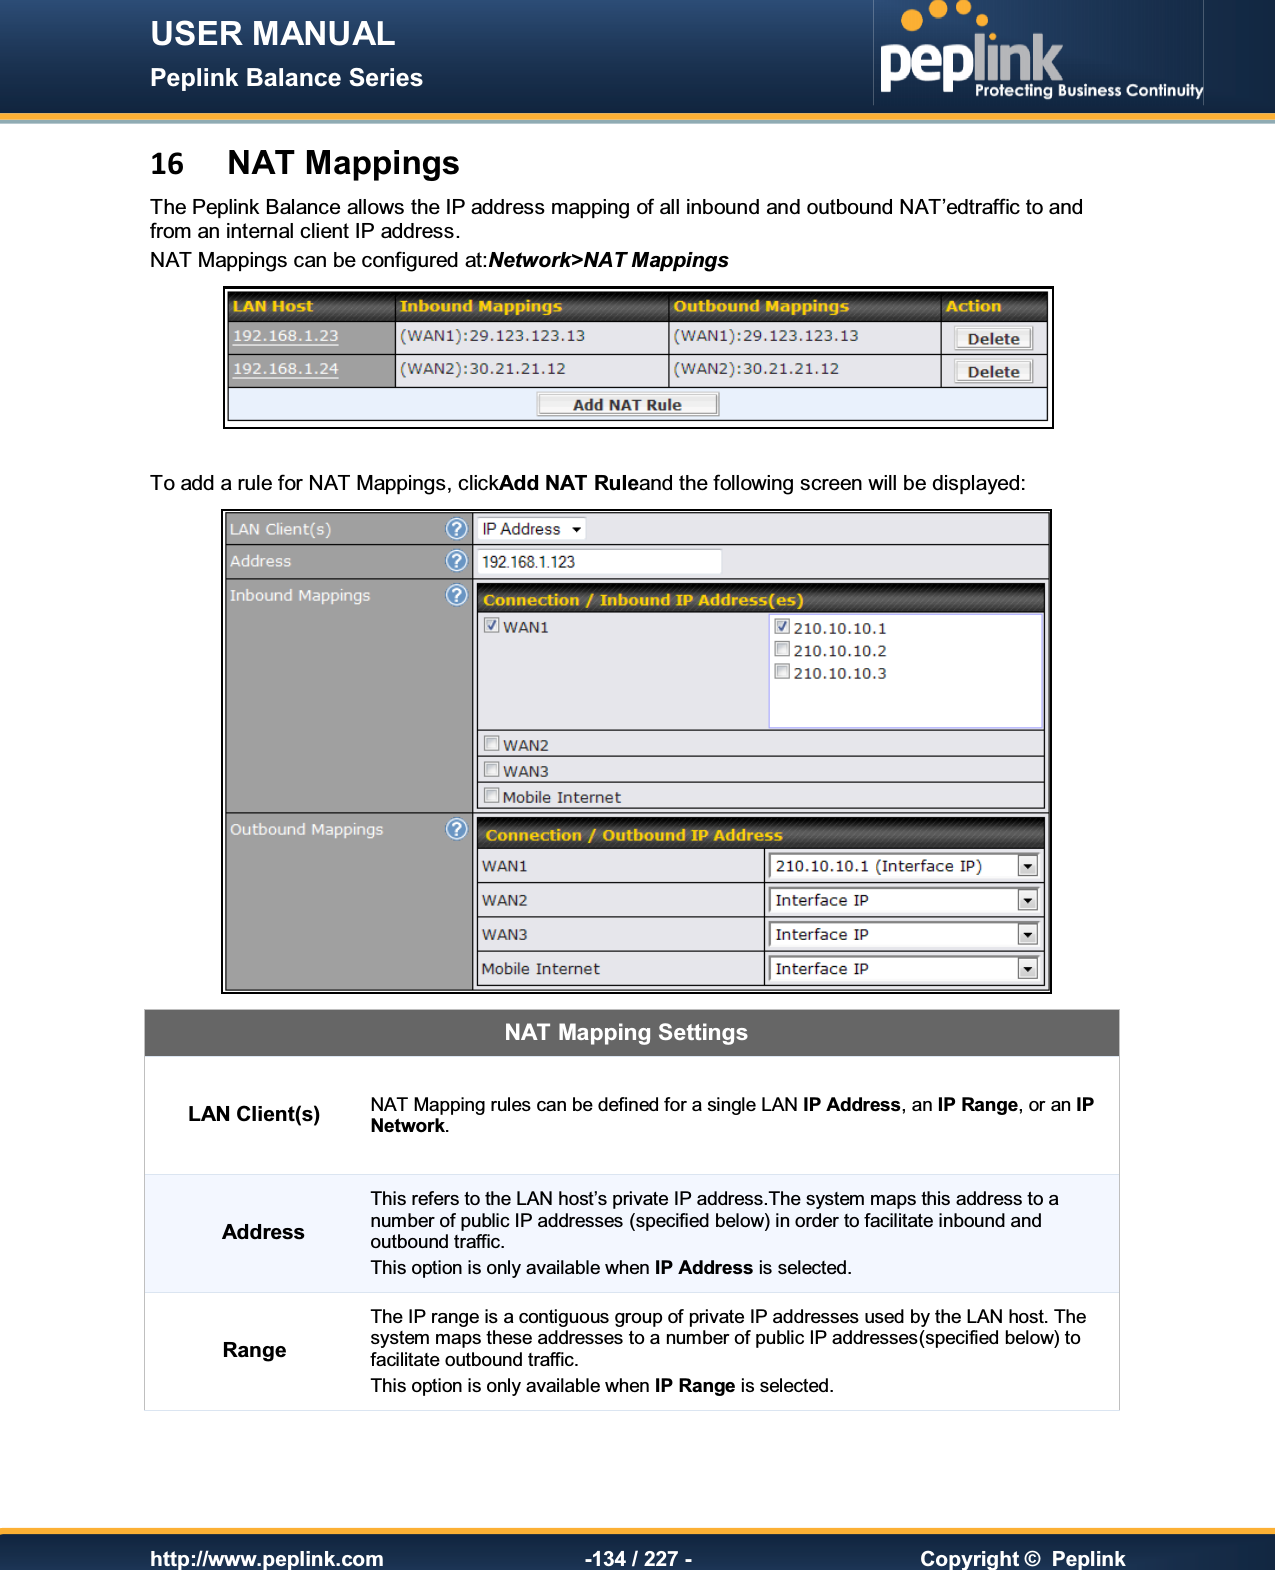 USER MANUAL Peplink Balance Series   http://www.peplink.com -134 / 227 -  Copyright ©  Peplink 16  NAT Mappings The Peplink Balance allows the IP address mapping of all inbound and outbound NAT’edtraffic to and from an internal client IP address. NAT Mappings can be configured at:Network&gt;NAT Mappings   To add a rule for NAT Mappings, clickAdd NAT Ruleand the following screen will be displayed:  NAT Mapping Settings LAN Client(s) NAT Mapping rules can be defined for a single LAN IP Address, an IP Range, or an IP Network. Address This refers to the LAN host’s private IP address.The system maps this address to a number of public IP addresses (specified below) in order to facilitate inbound and outbound traffic. This option is only available when IP Address is selected. Range The IP range is a contiguous group of private IP addresses used by the LAN host. The system maps these addresses to a number of public IP addresses(specified below) to facilitate outbound traffic. This option is only available when IP Range is selected. 